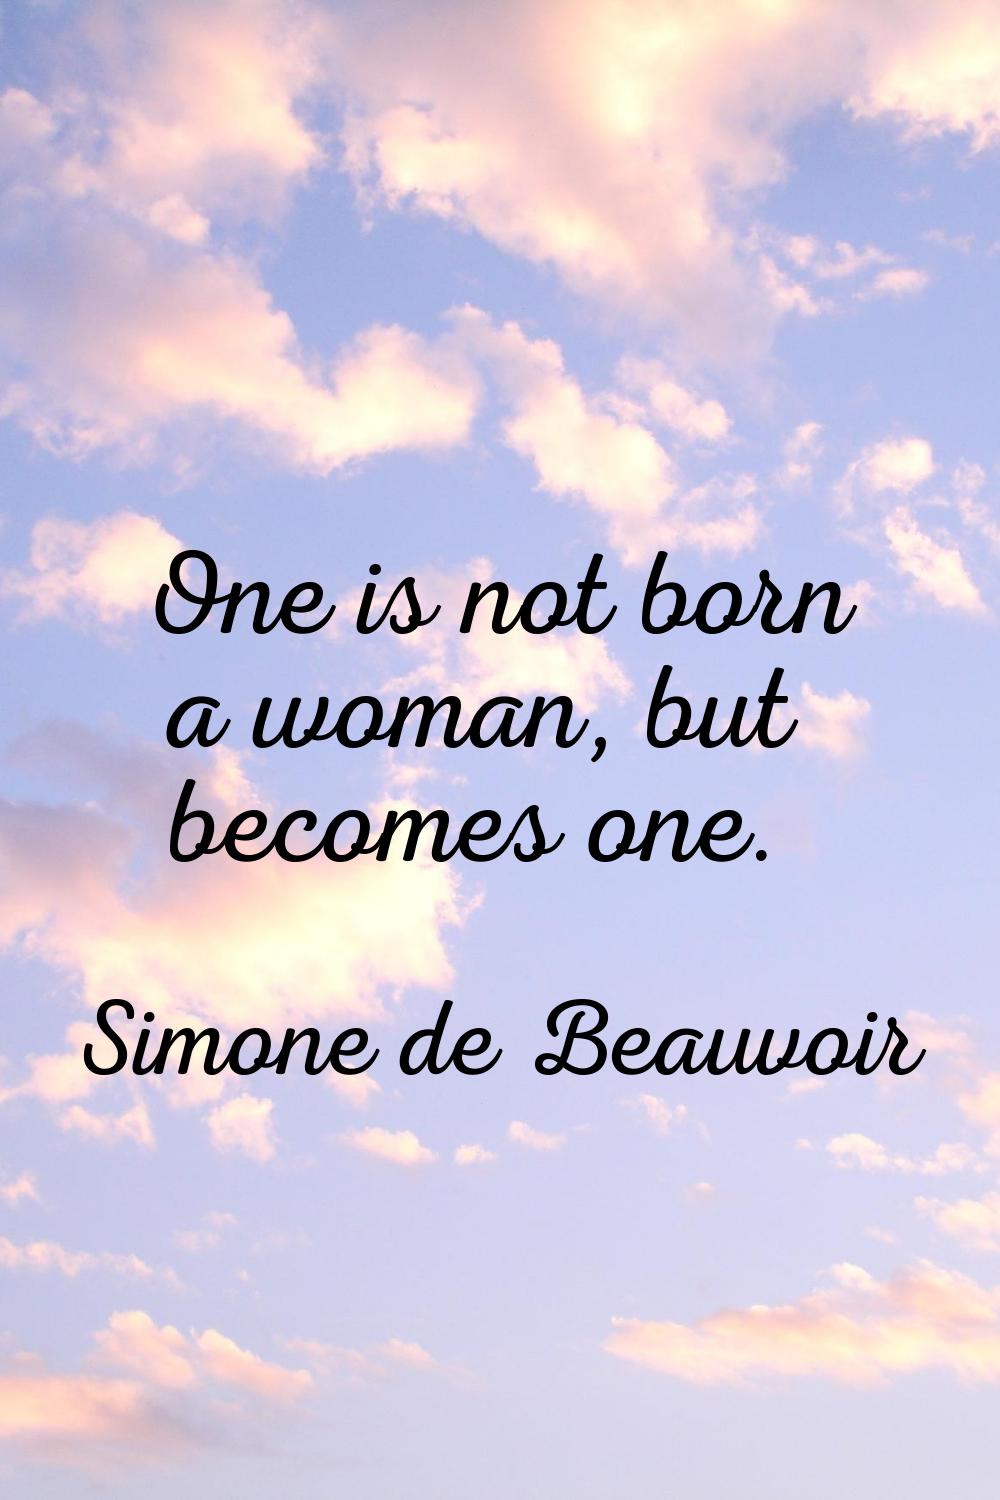 One is not born a woman, but becomes one.